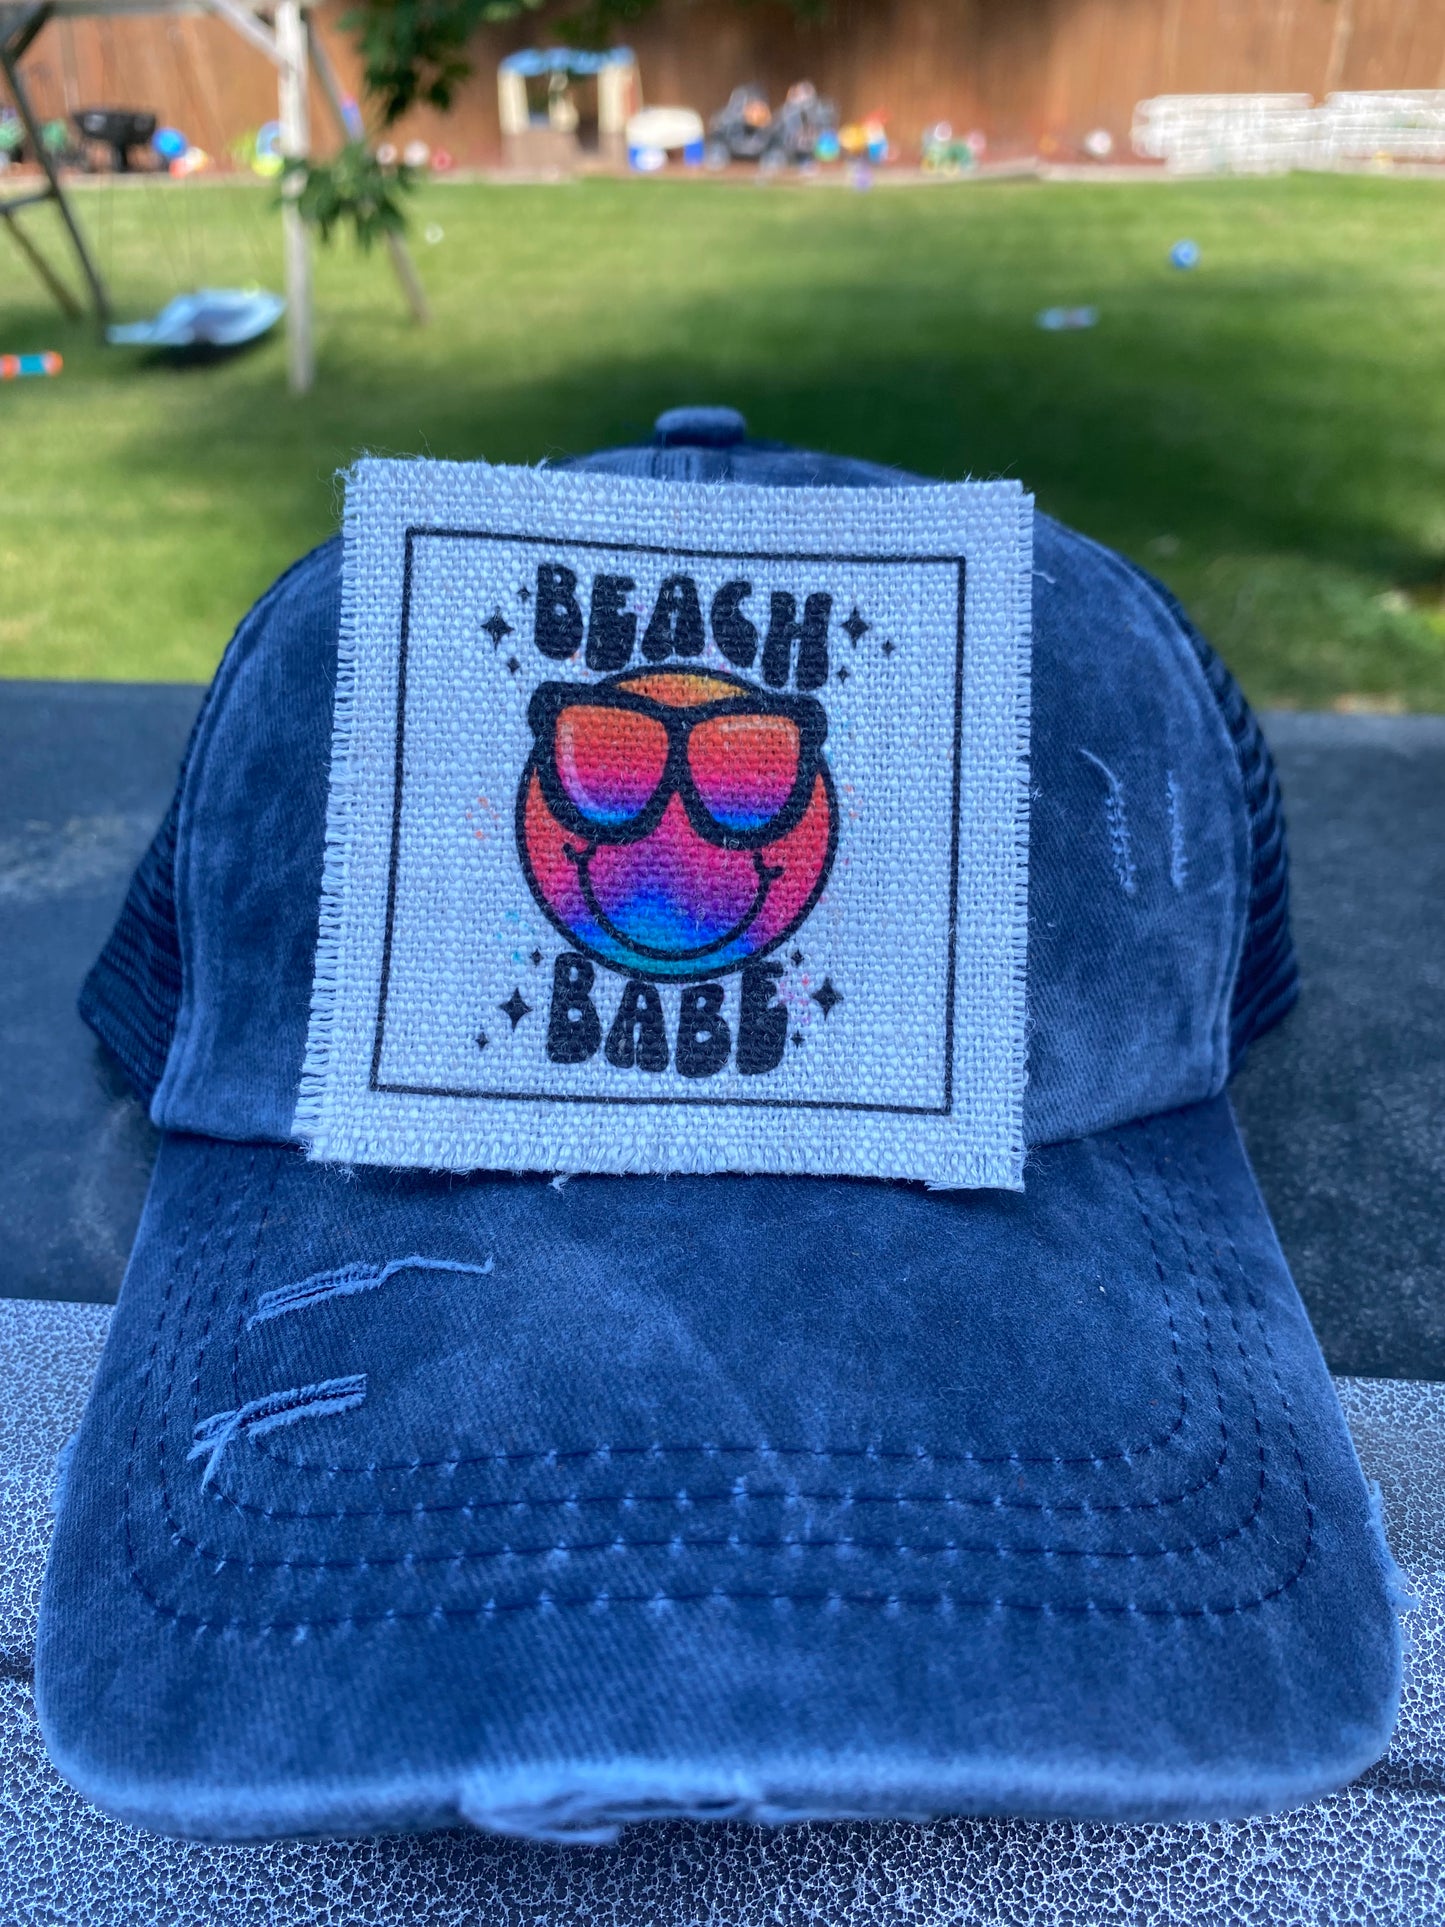 Beach Babe Smiley Hat Patch